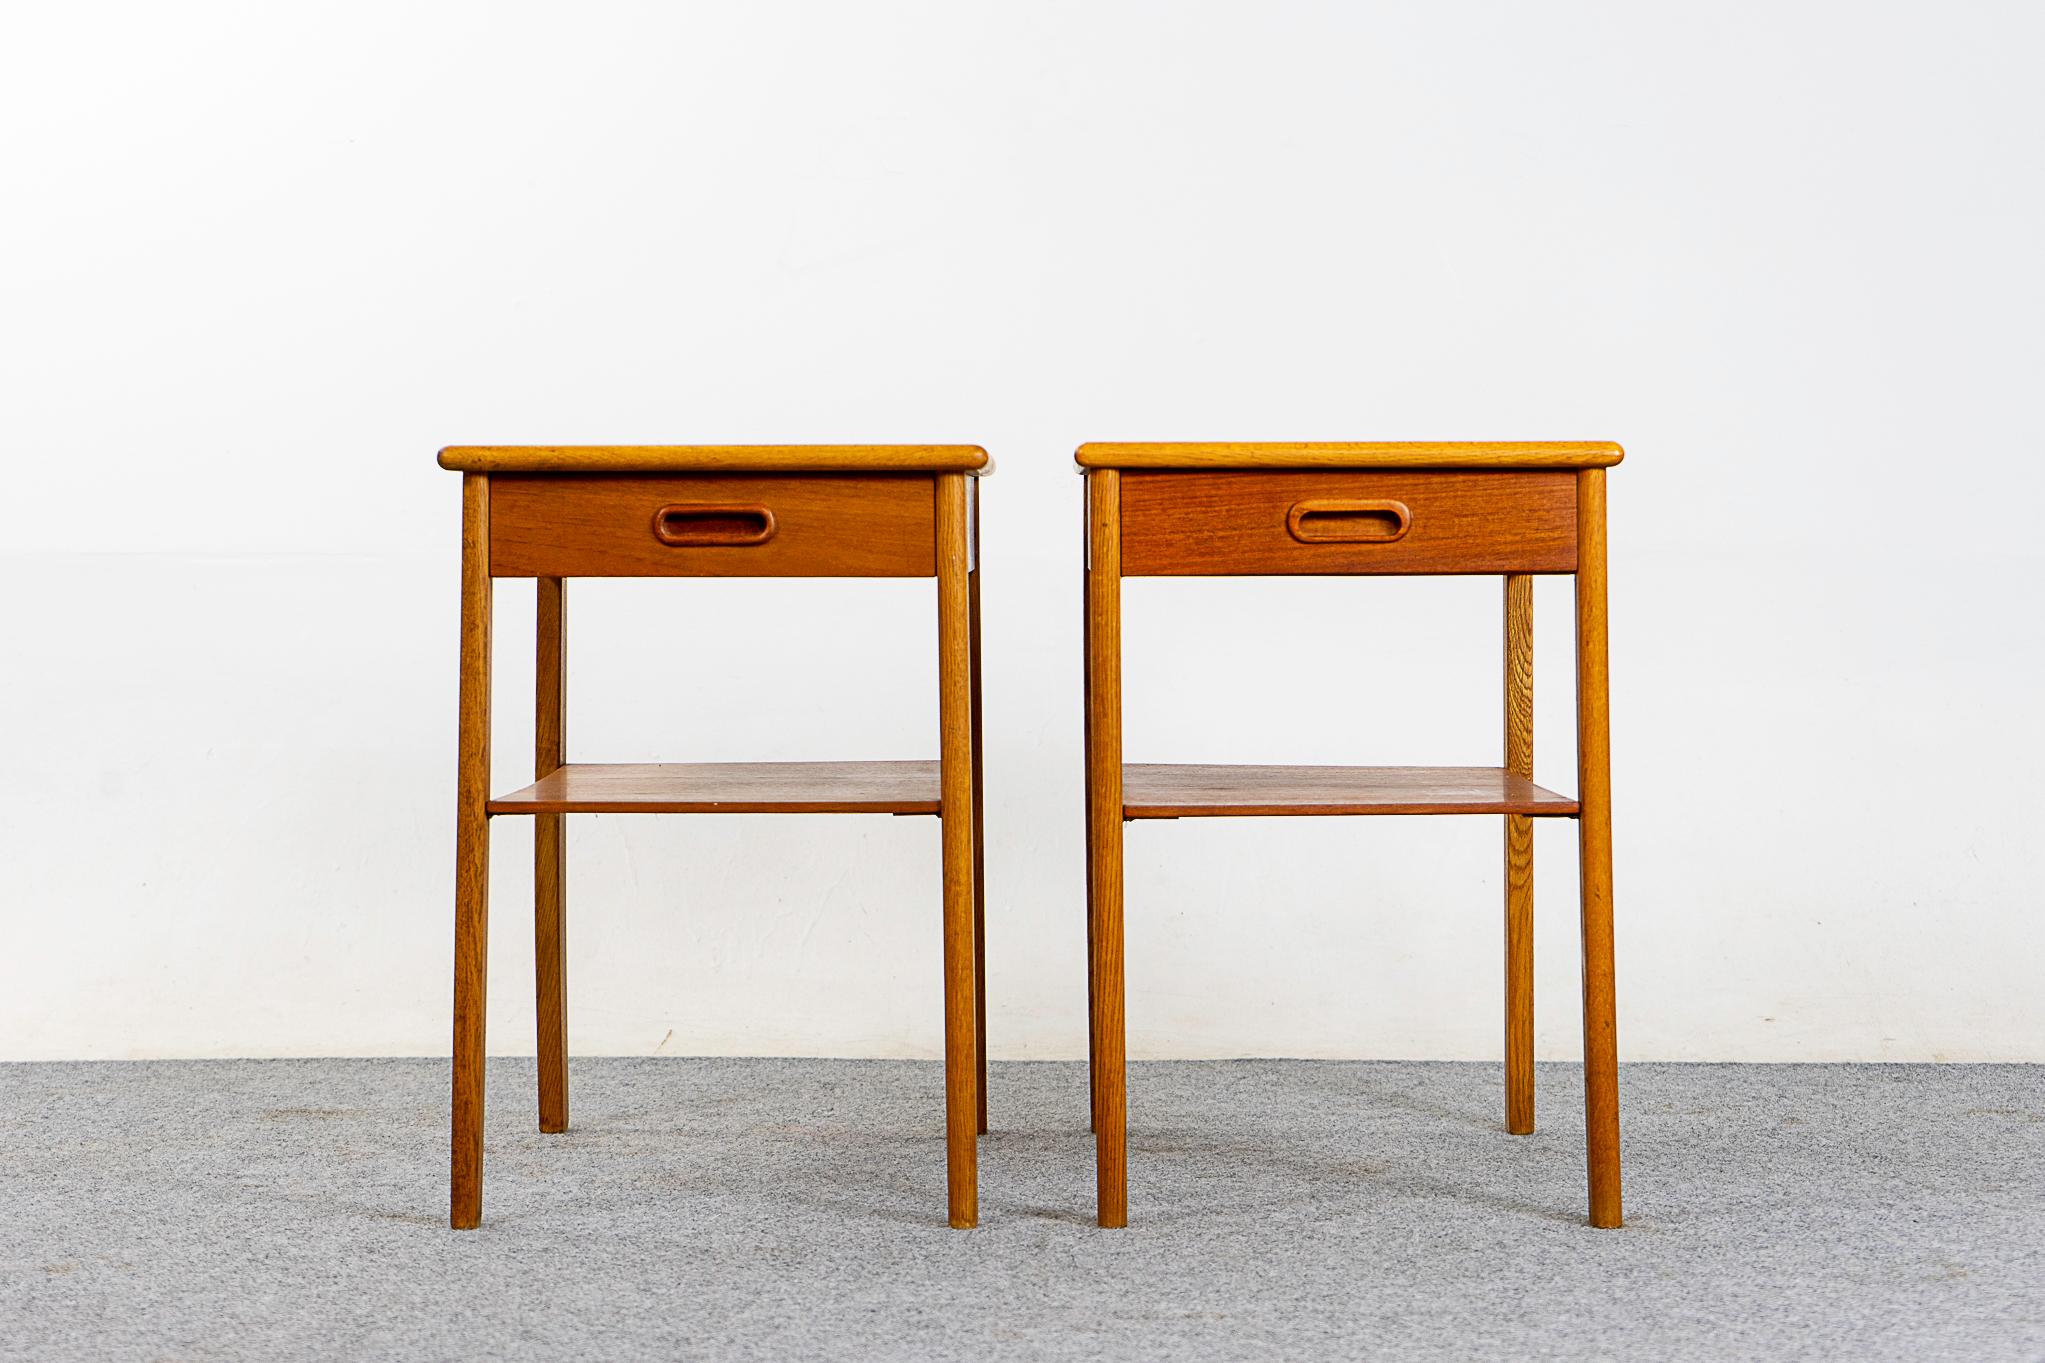 Teak & oak Danish bedside tables, circa 1960s. Beautifully veneered case rests on slender legs. Dovetailed drawer for small items, open shelf is perfect for your favorite book.

Unrestored item, some marks consistent with age, back strip is